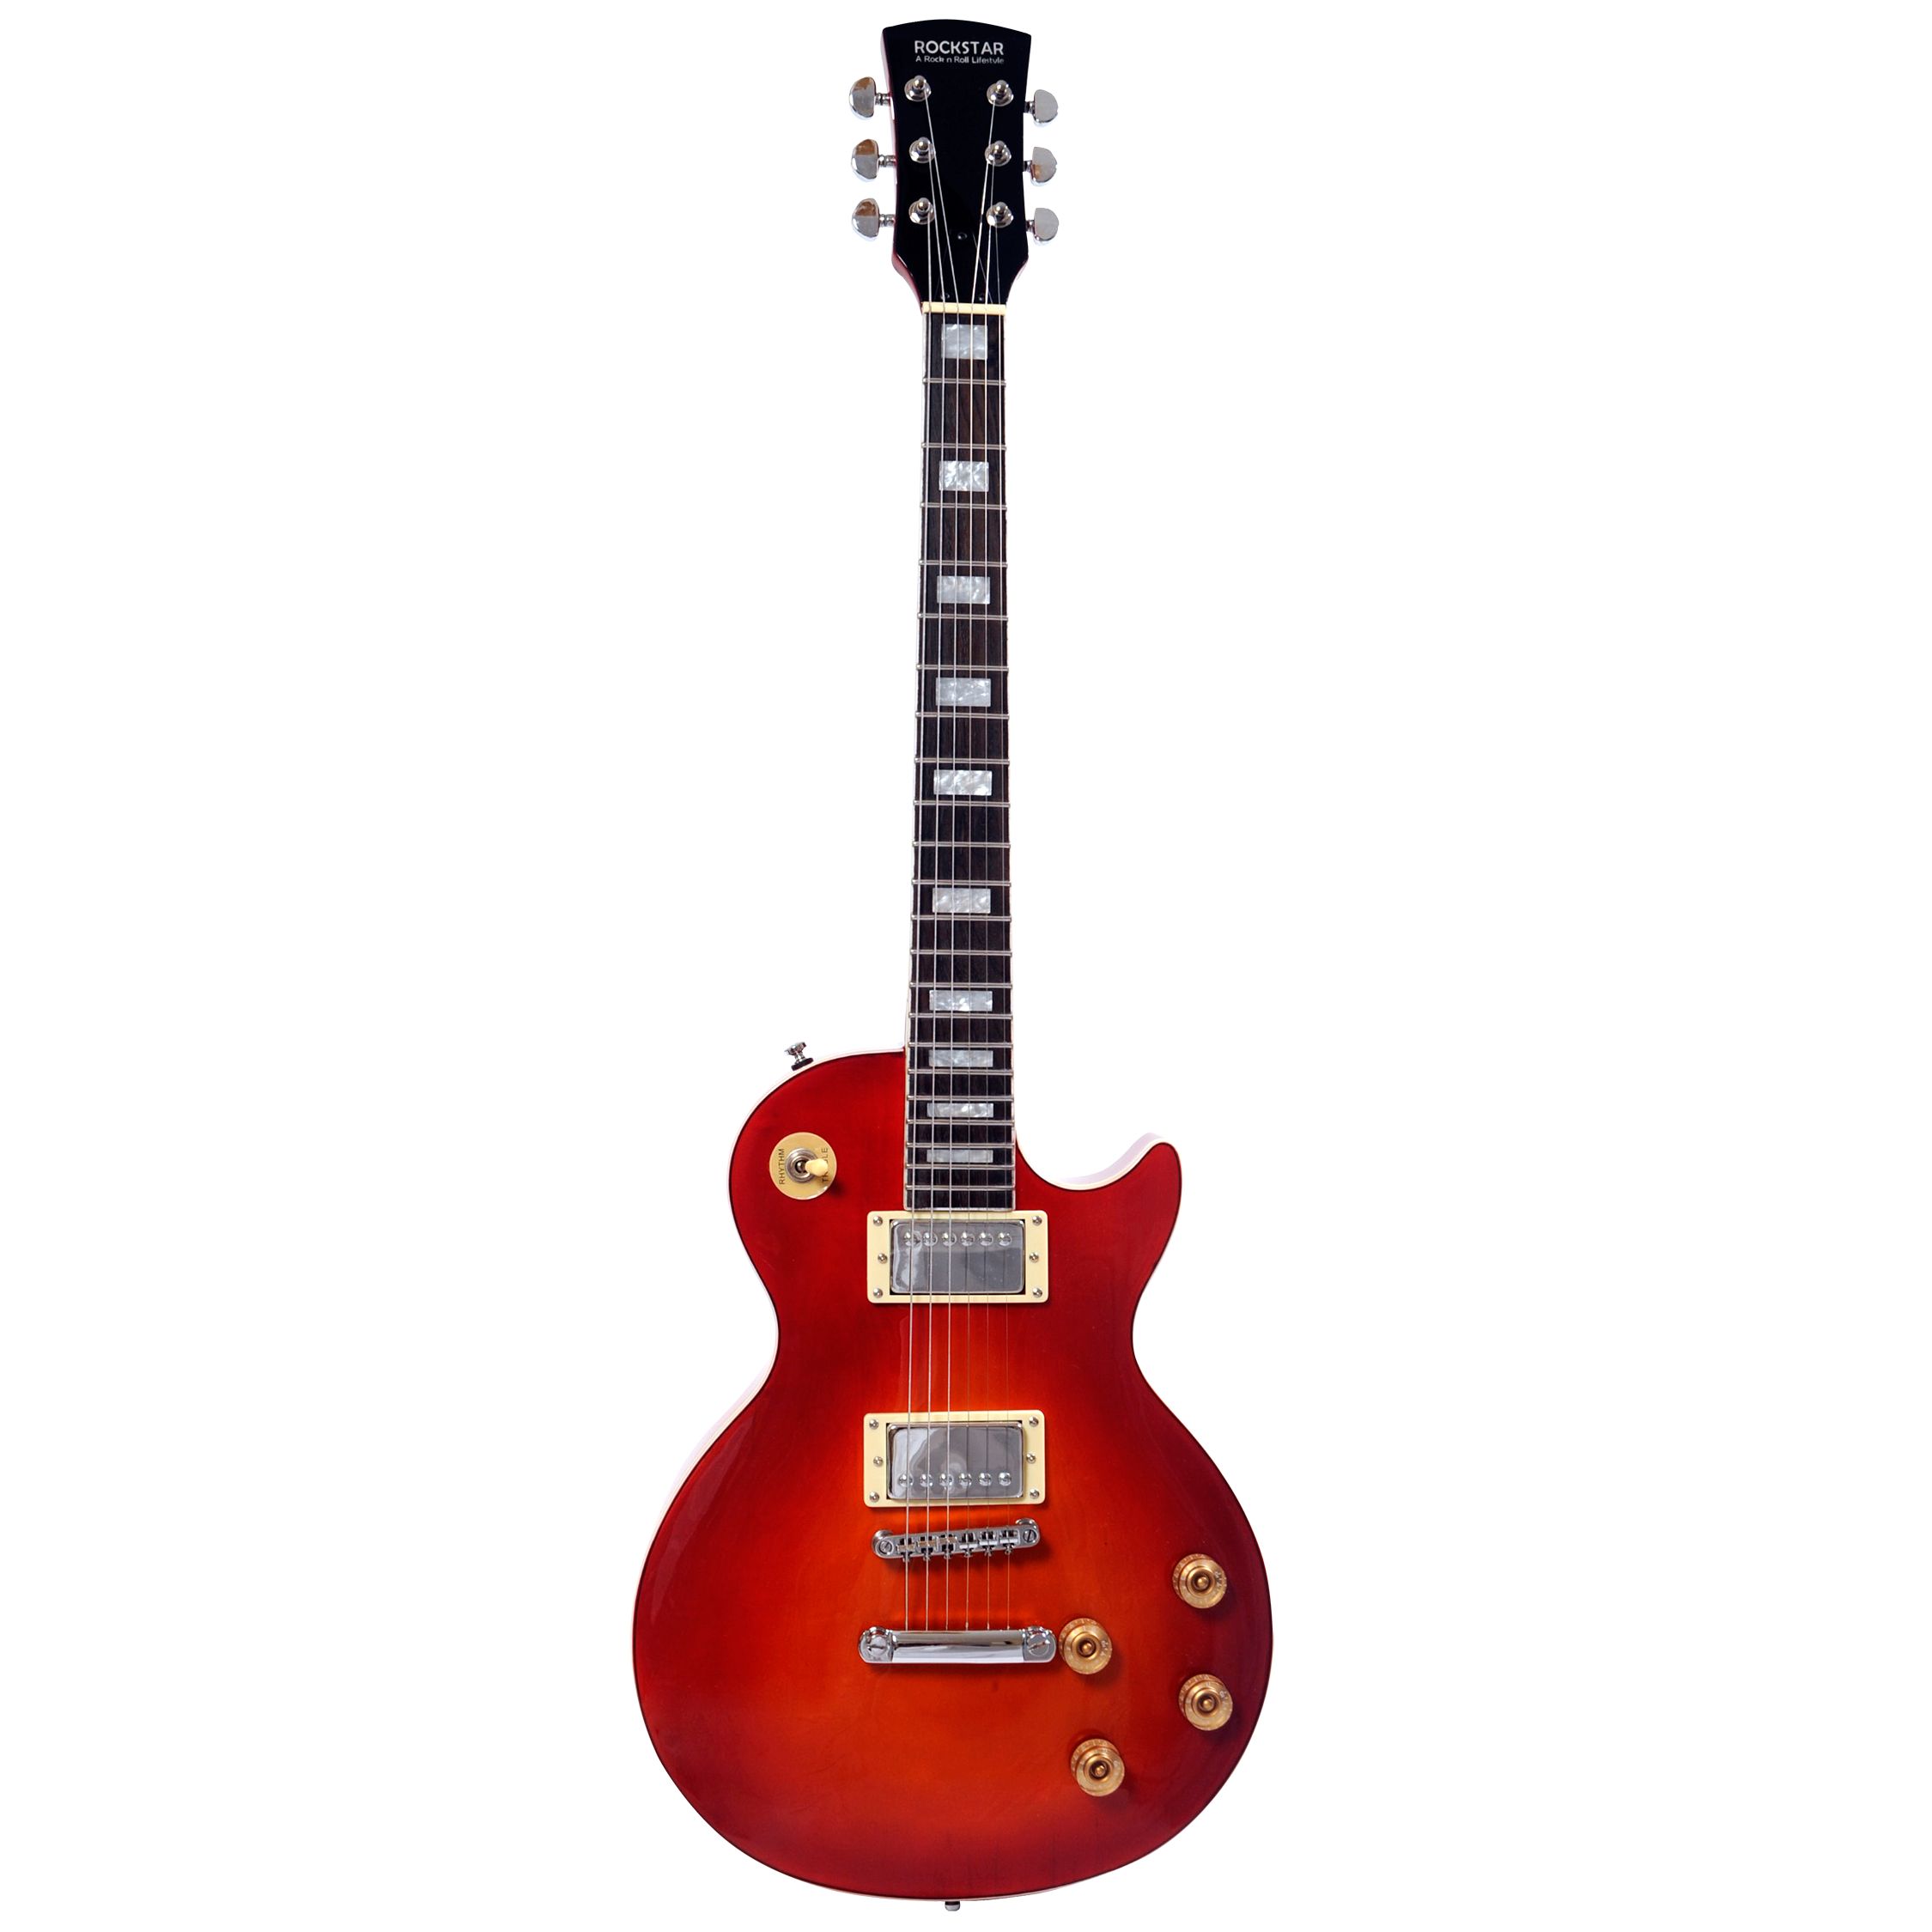 Rock Star Academy LP Style Electric Guitar Package with Amplifier Cherry Sunburst at John Lewis